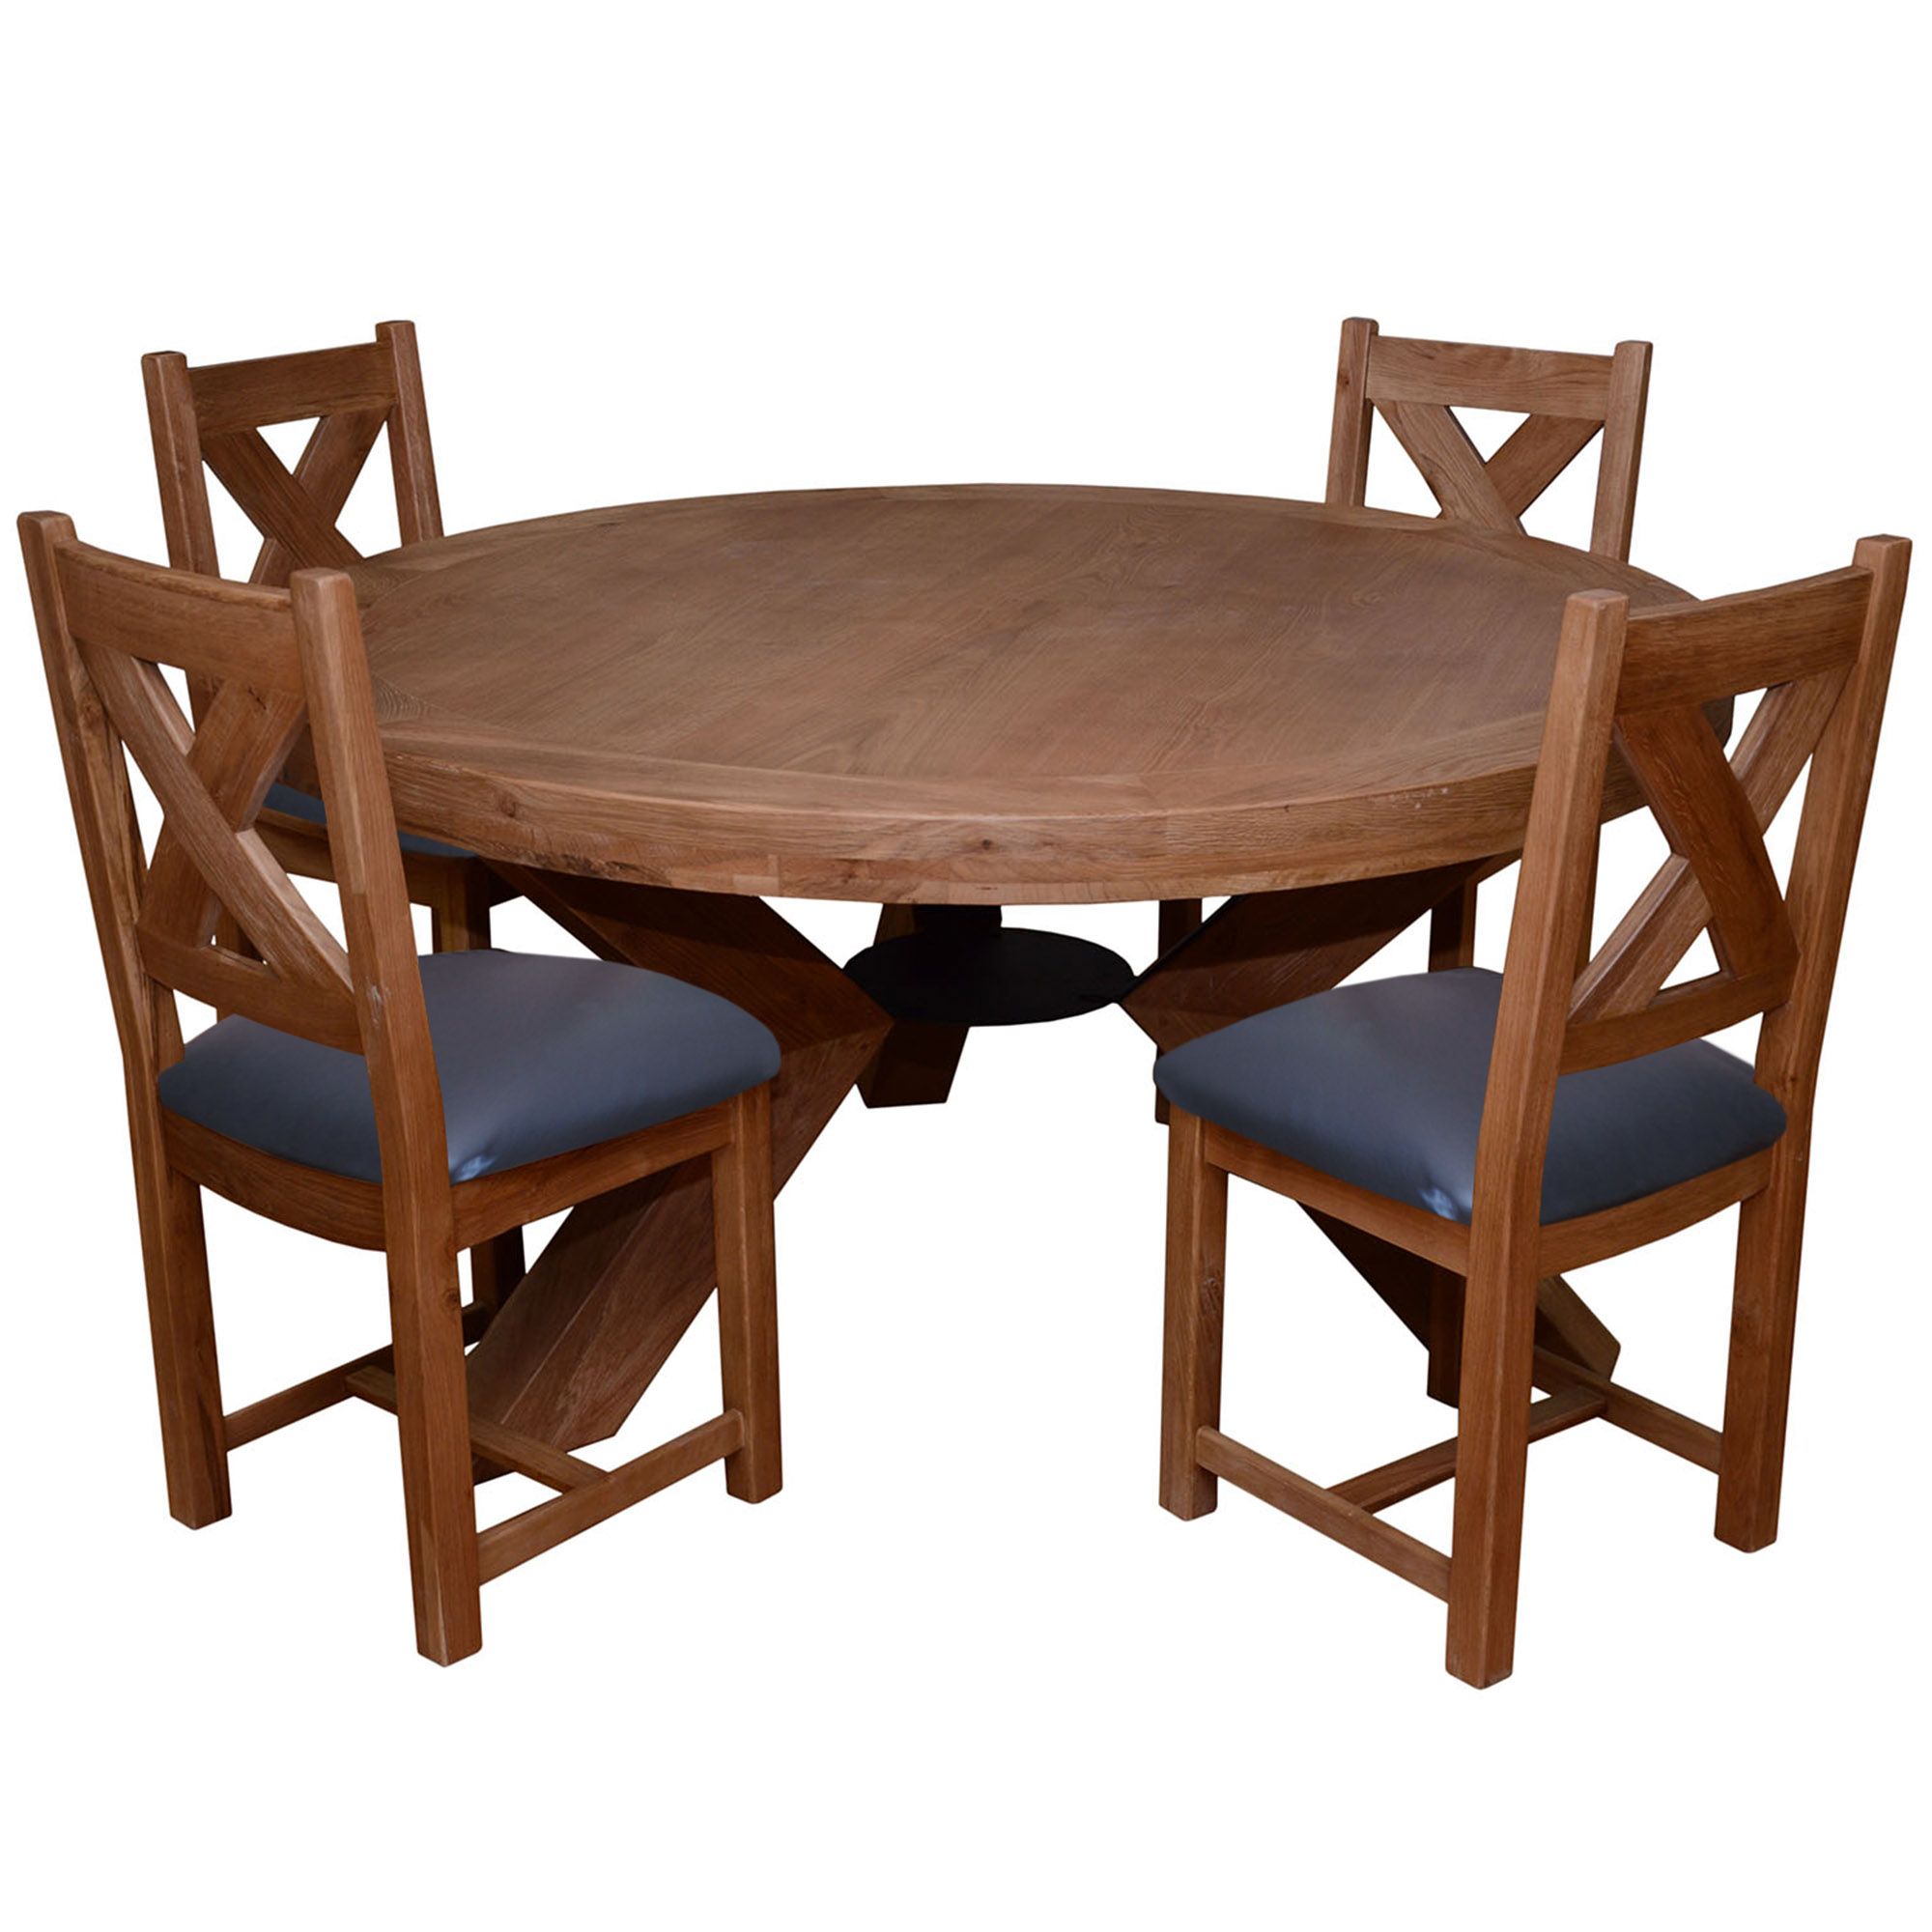 Dining Table Chair Sets, 6 Person Round Tables